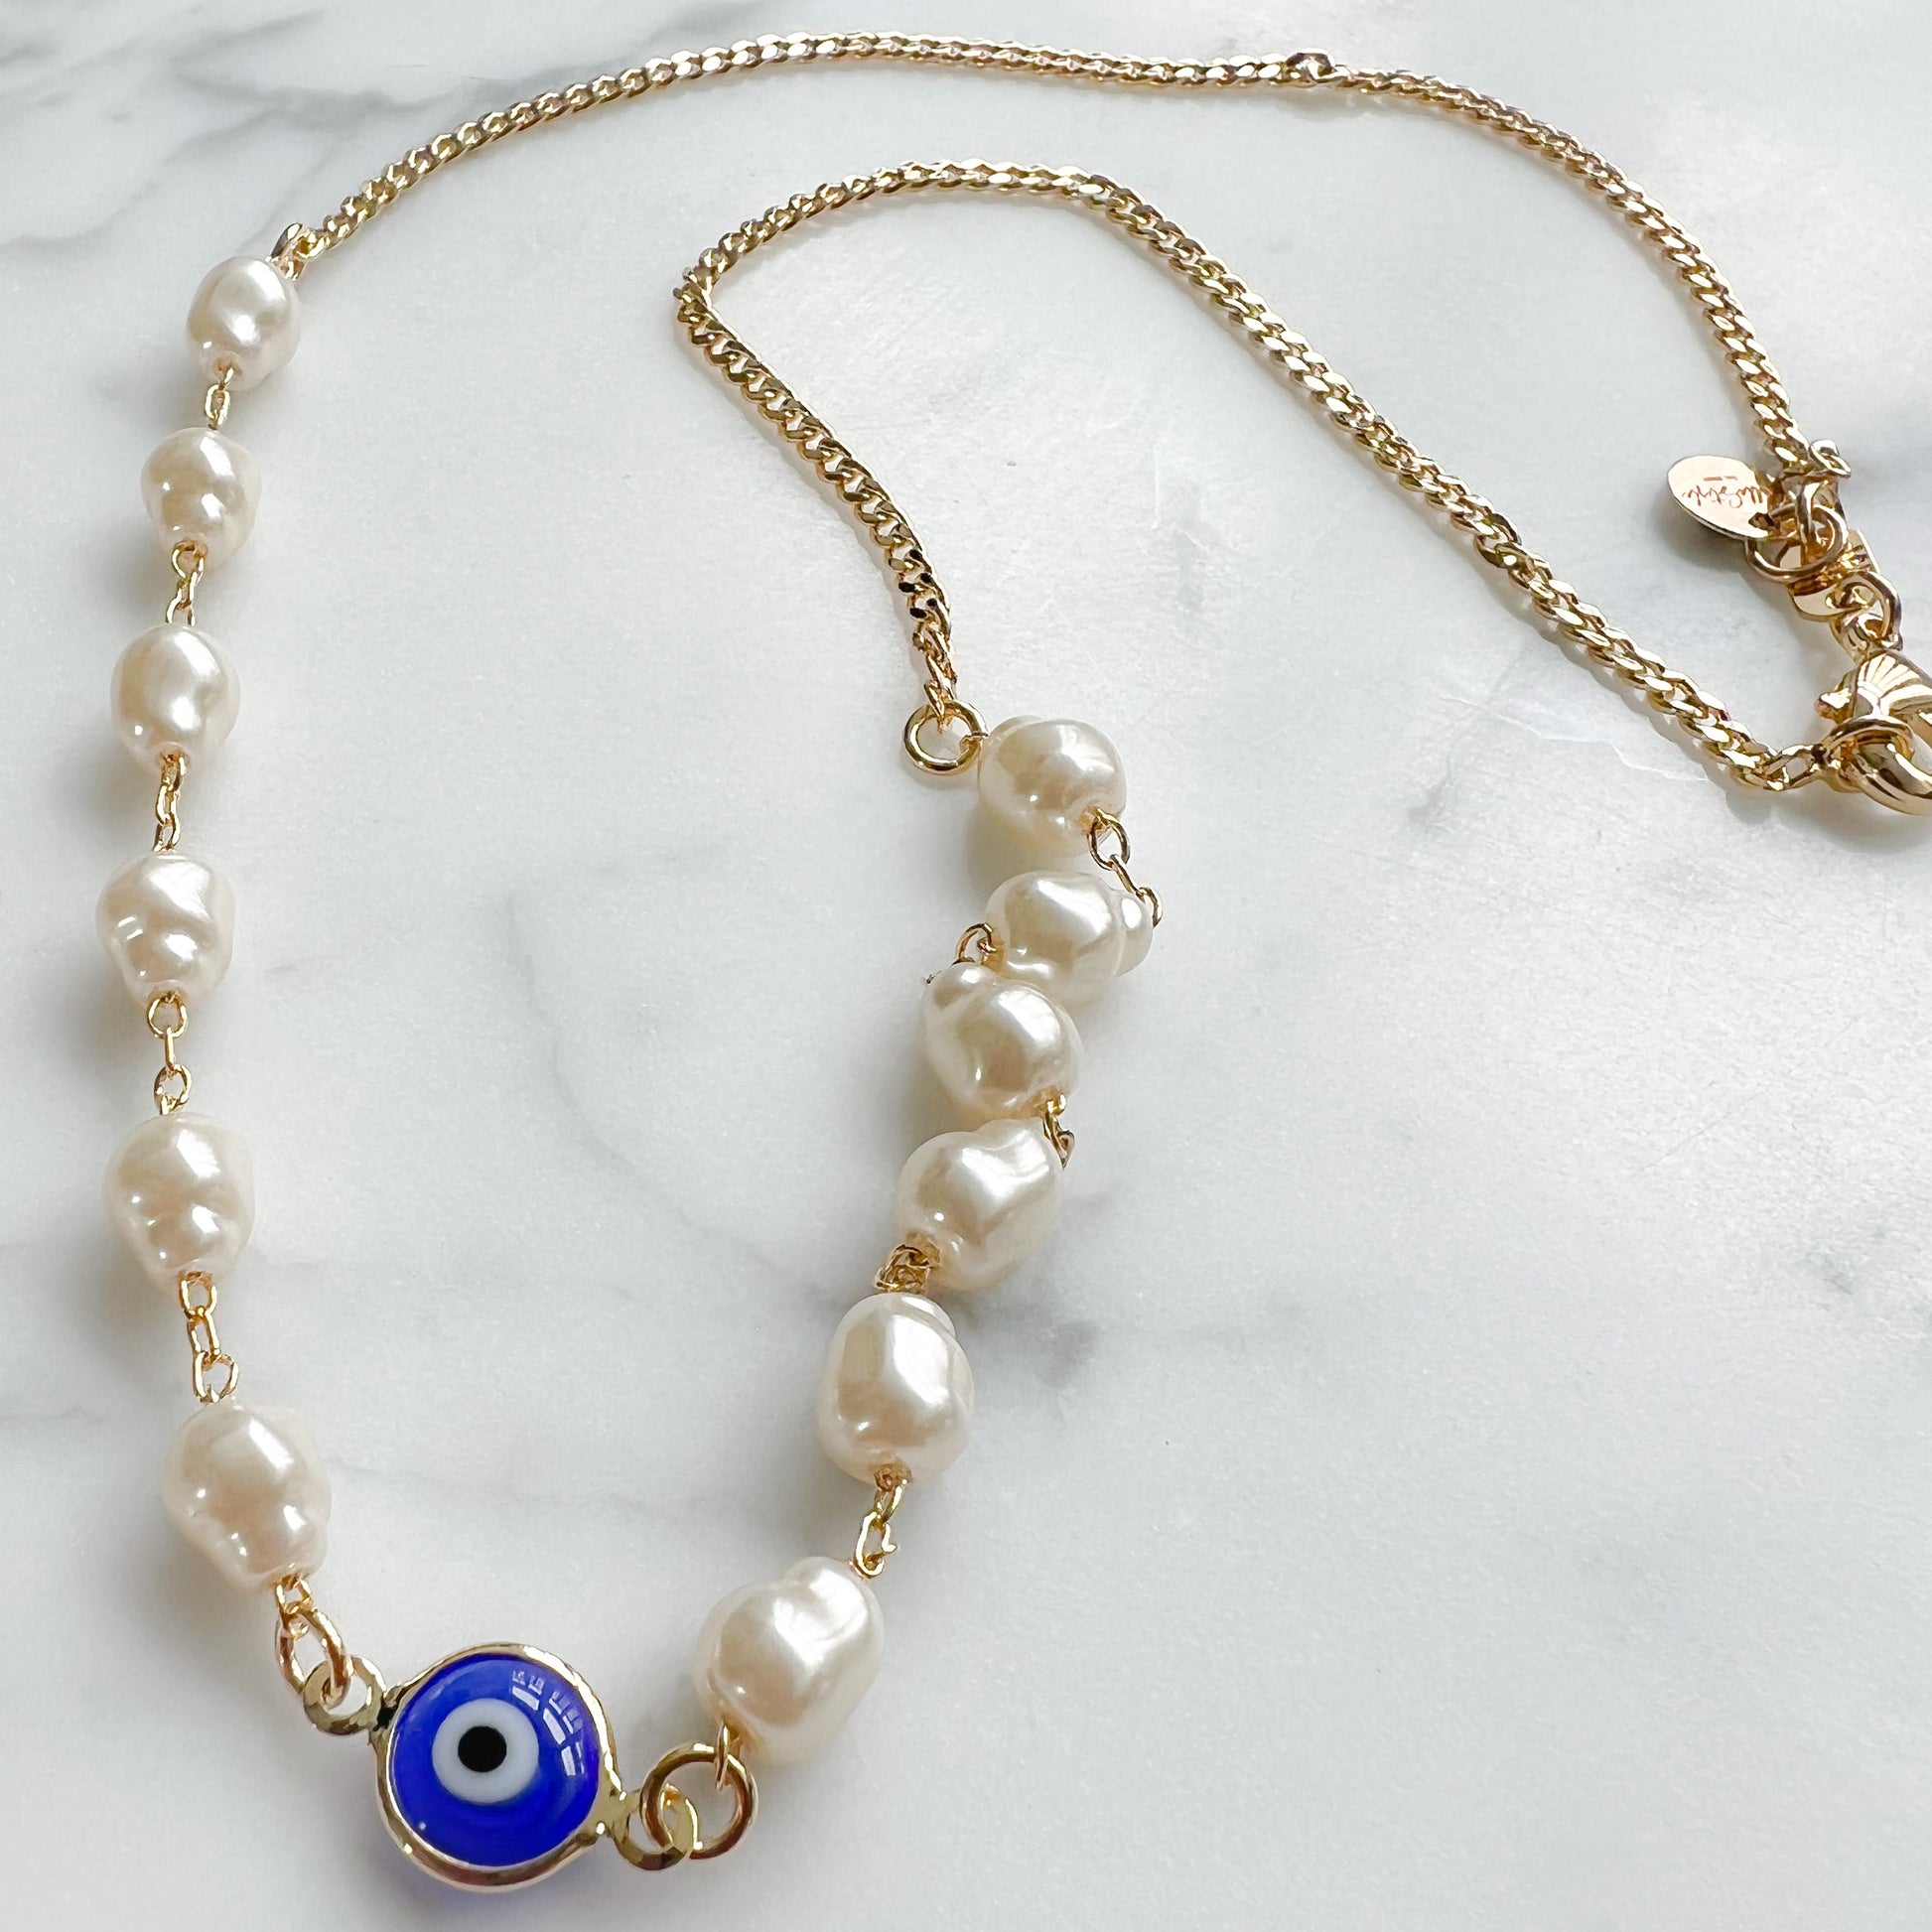 Blue Evil Eye Curb Chain Necklace - BelleStyle